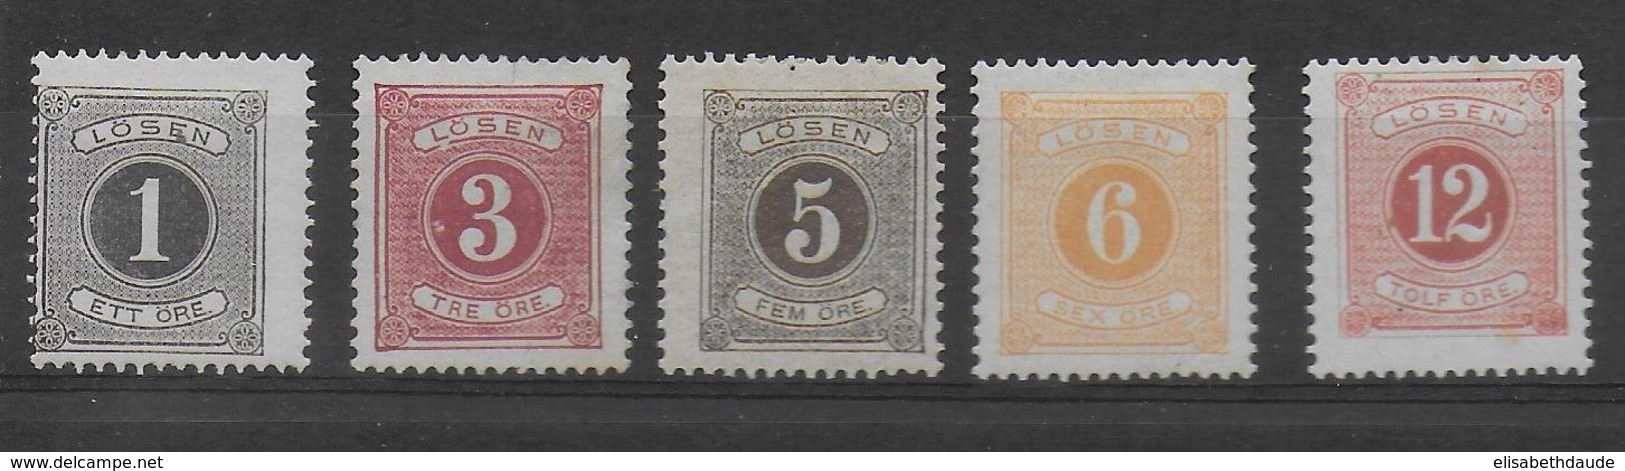 SUEDE - TAXE YVERT N°1/5 A * MH  - COTE = 28.5 EUR. - Unused Stamps